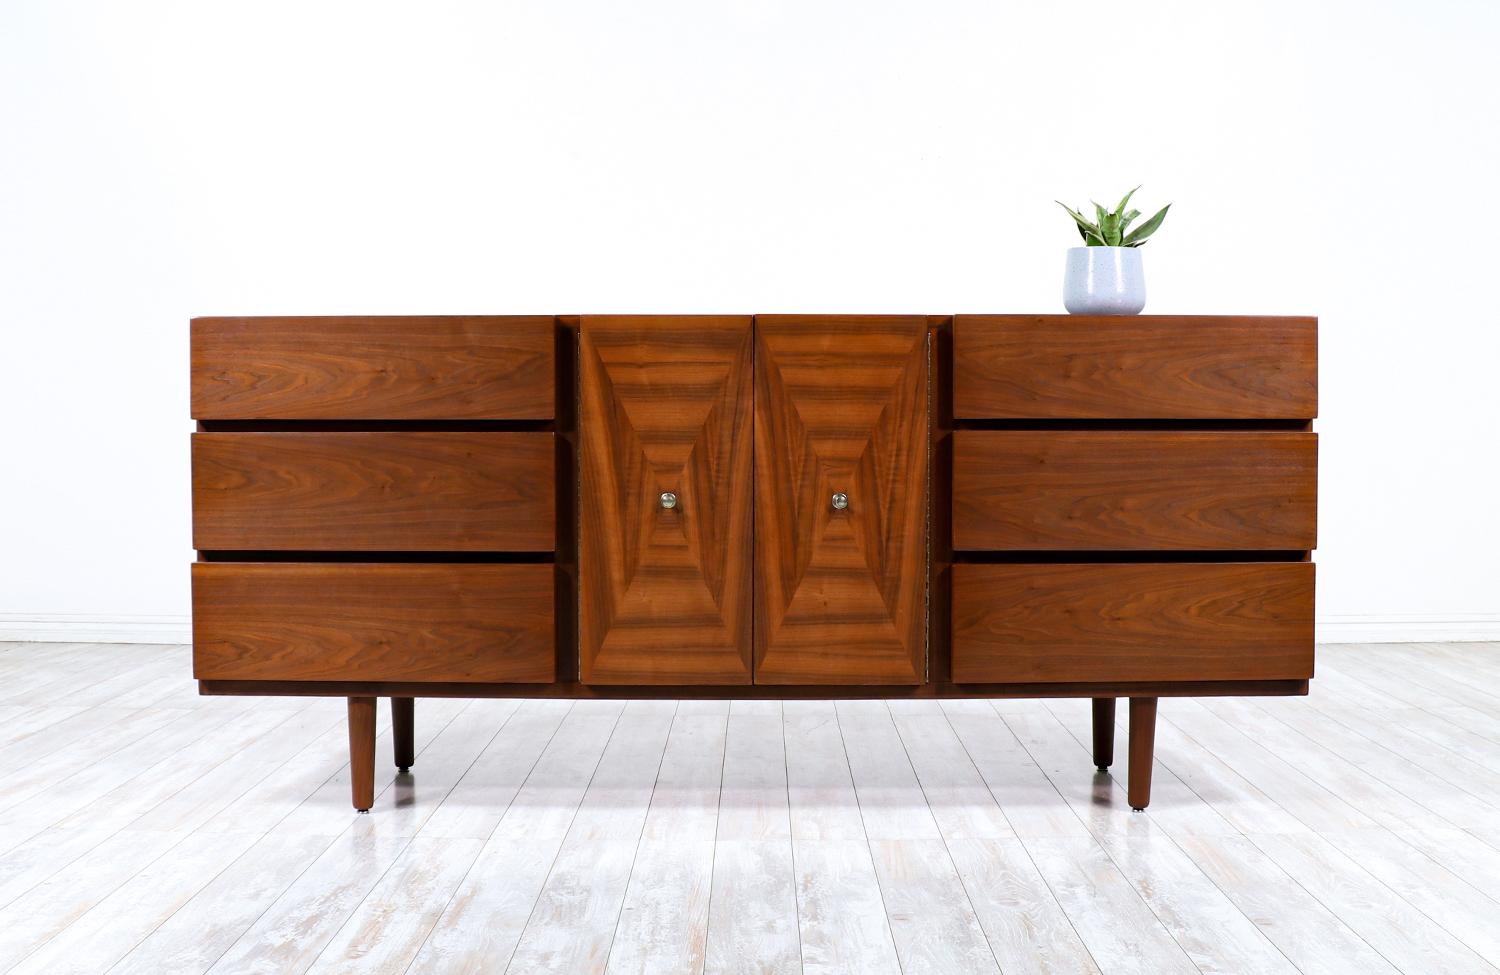 American of Martinsville 9-drawers walnut dresser.

________________________________________

Transforming a piece of Mid-Century Modern furniture is like bringing history back to life, and we take this journey with passion and precision. With over